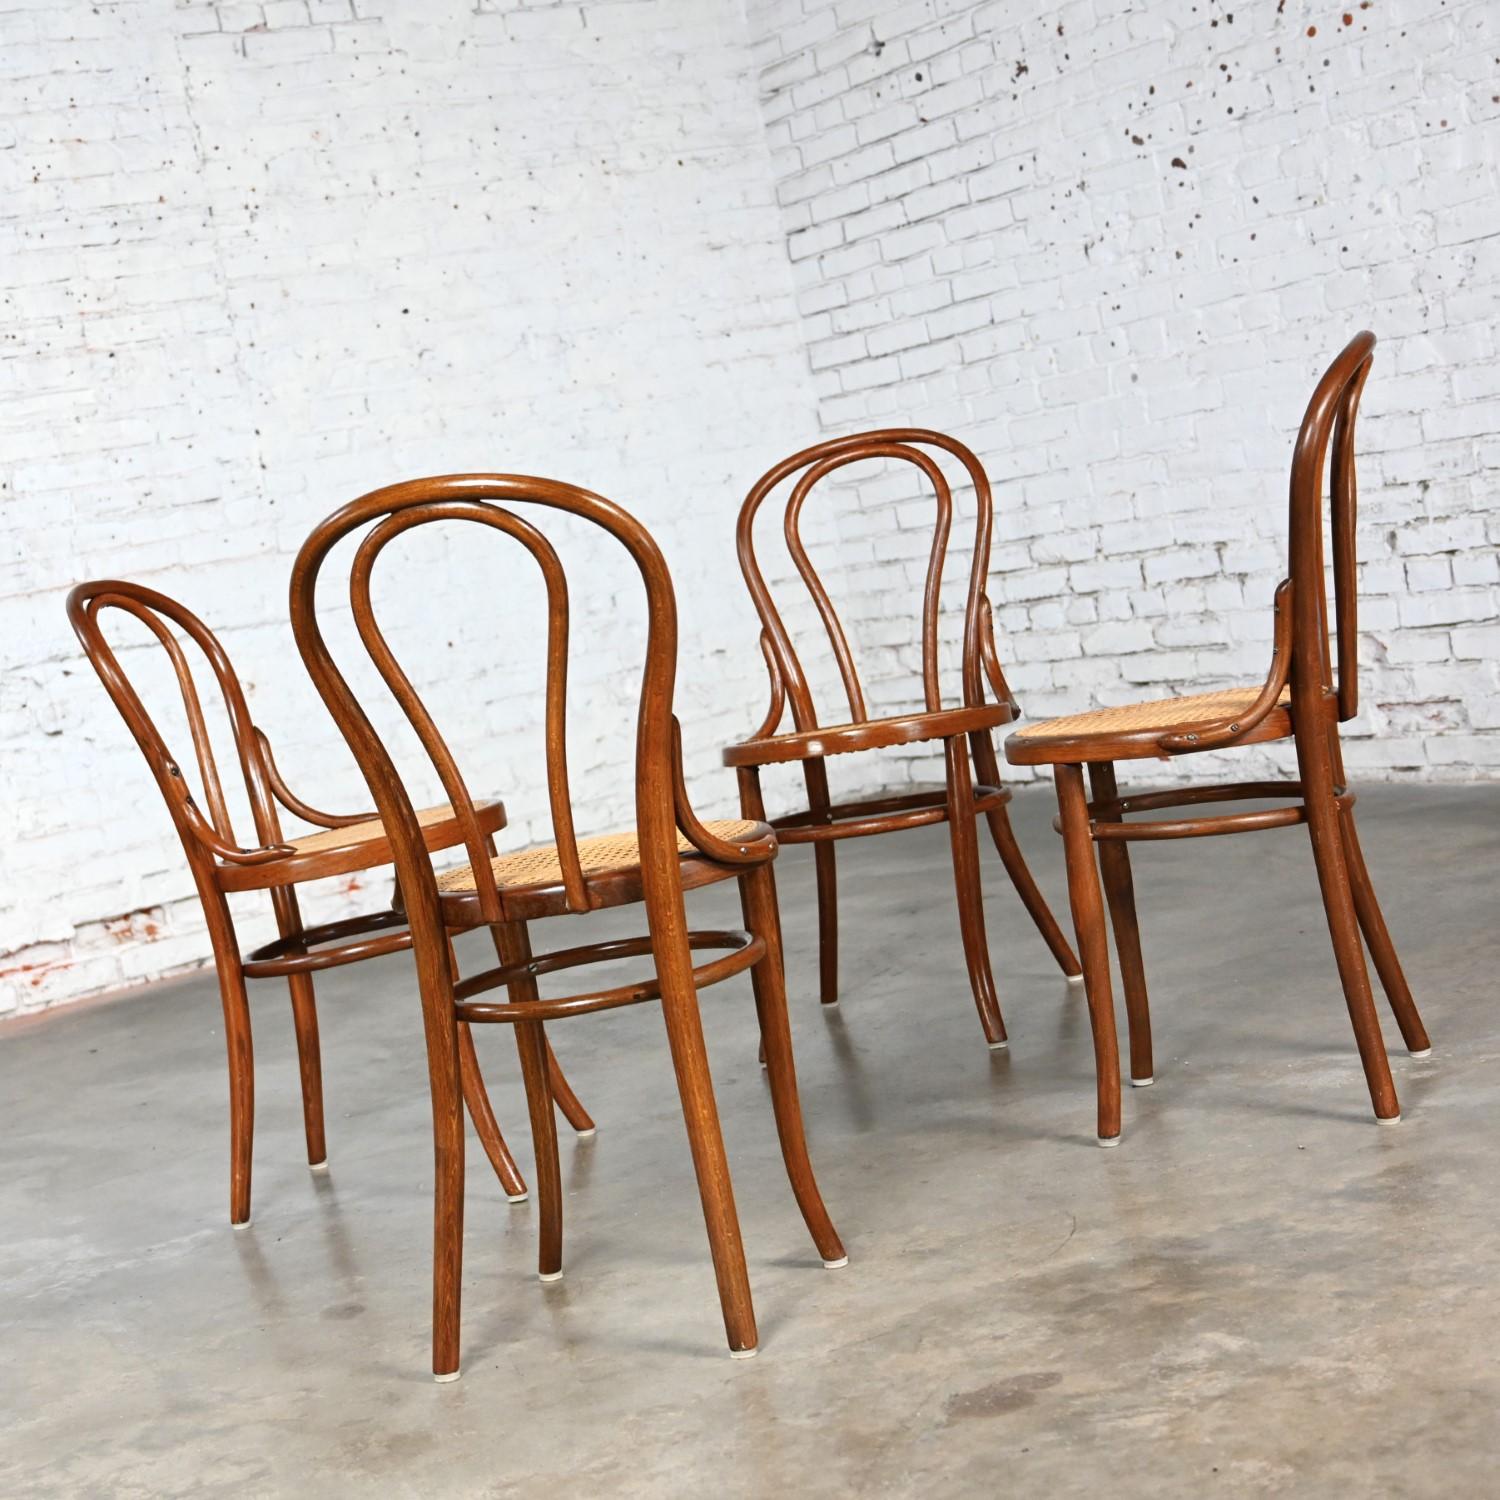 Fabulous Late 19th to Early 20th Century Bauhaus style #18 Café Chairs by Thonet comprised of bentwood frames and newly hand canes seats. Beautiful condition, keeping in mind that these are vintage and not new so will have signs of use and wear even